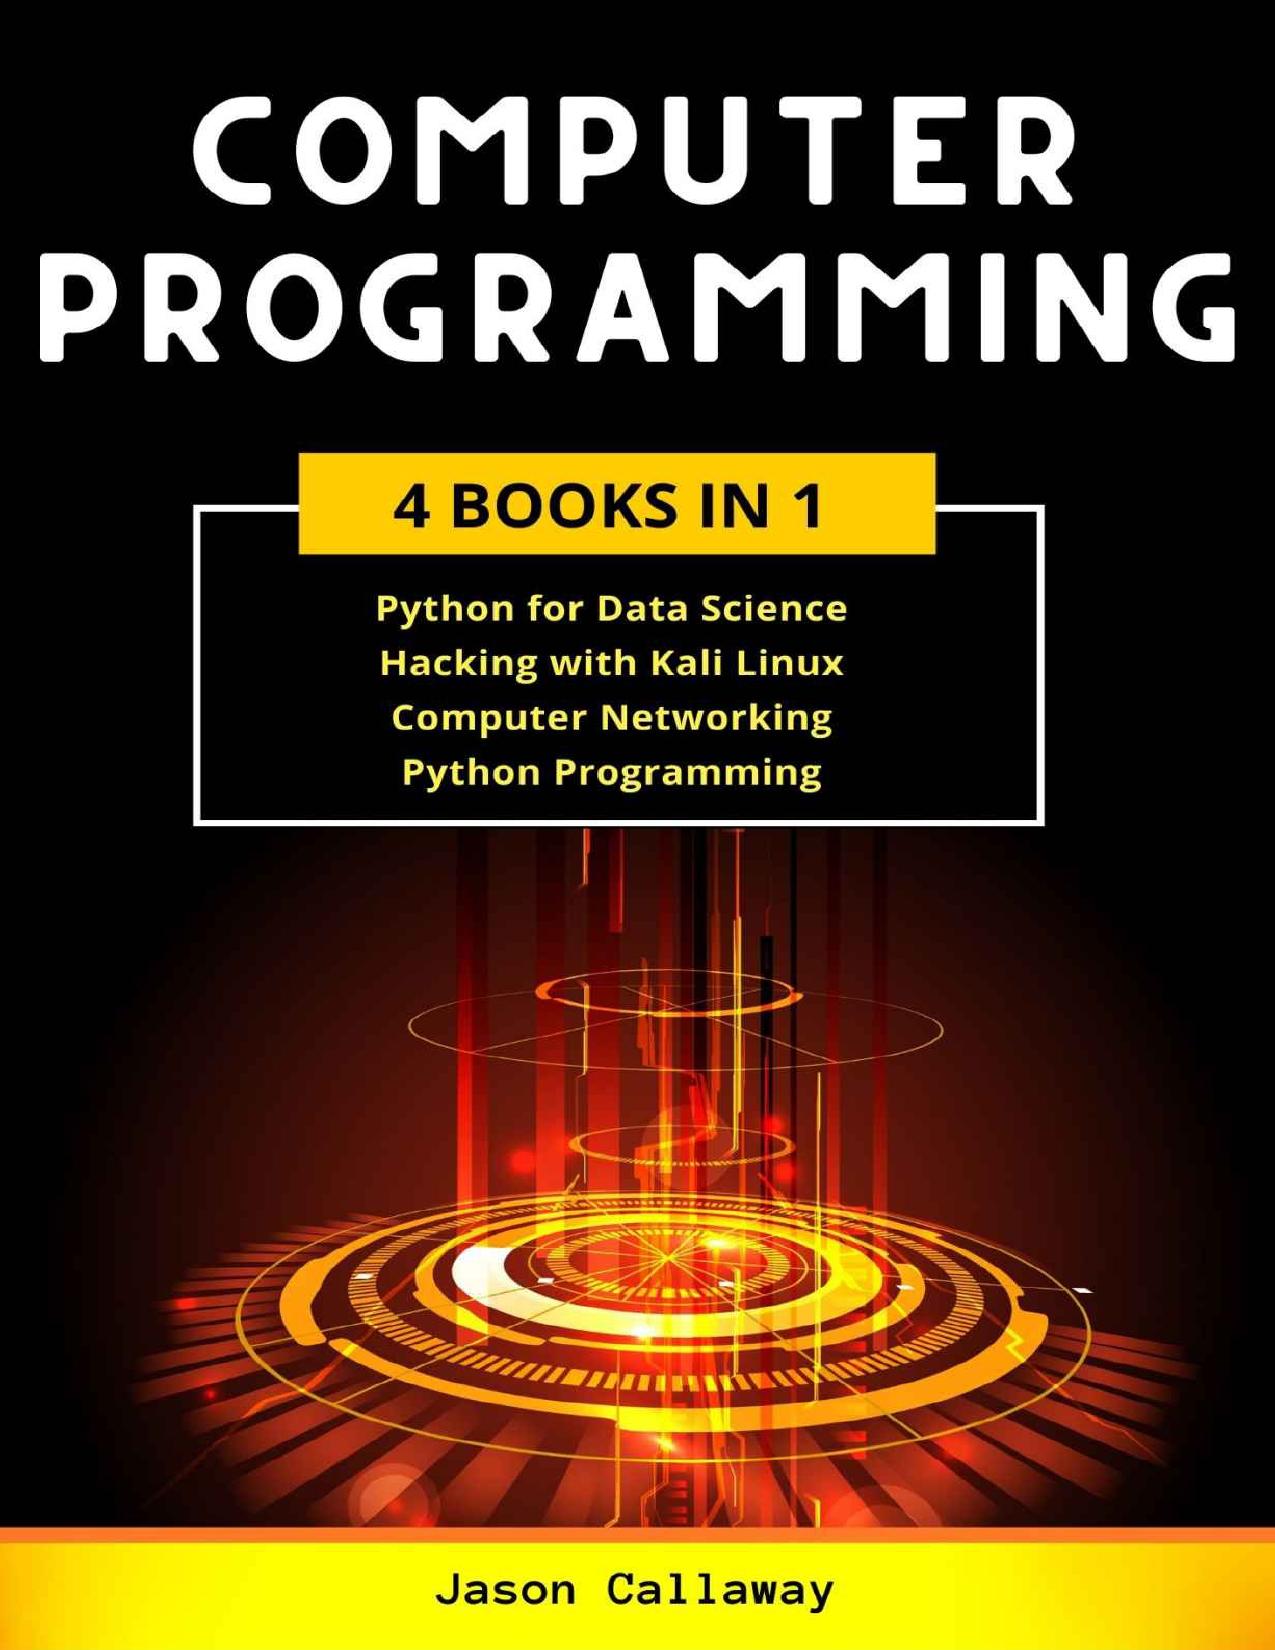 Computer Programming: 4 Books in 1: Data Science, Hacking With Kali Linux, Computer Networking for Beginners, Python Programming. Coding Language for Machine Learning and Artificial Intelligence